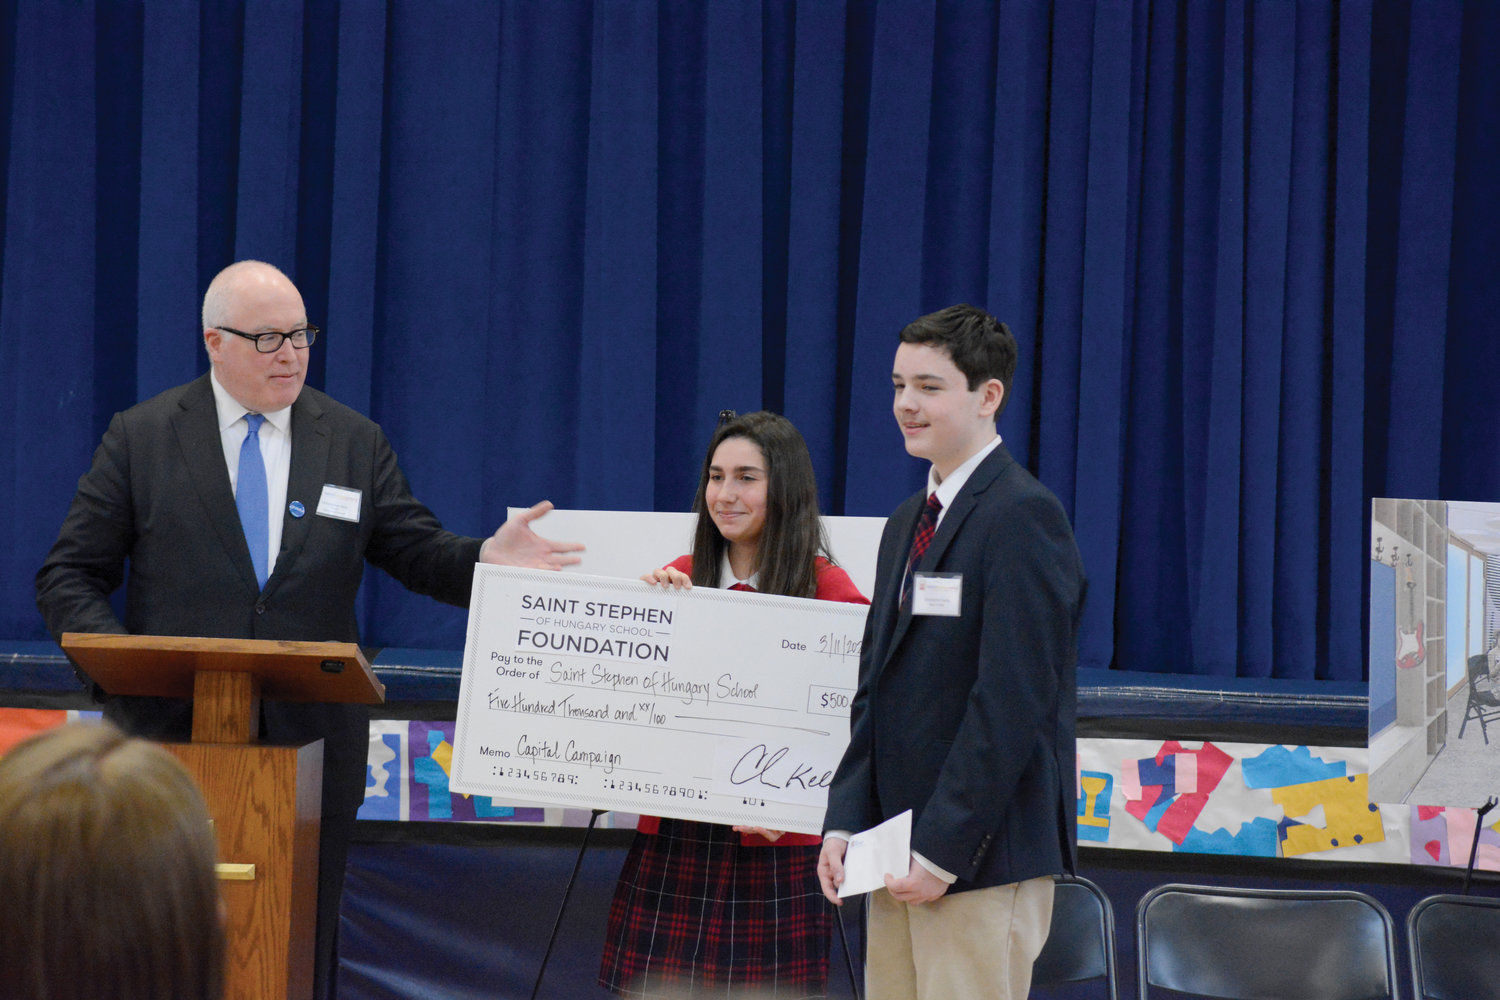 Foundation representative Christopher Kelly presents a ceremonial capital improvement check for the growing school, which is beginning a capital campaign to renovate the adjoining friary to accommodate increasing student enrollment. Construction to renovate preschool classrooms, the parking area and the school play yard is under way. Holding the check are eighth-graders Emily Carbone and Christopher Ganly.